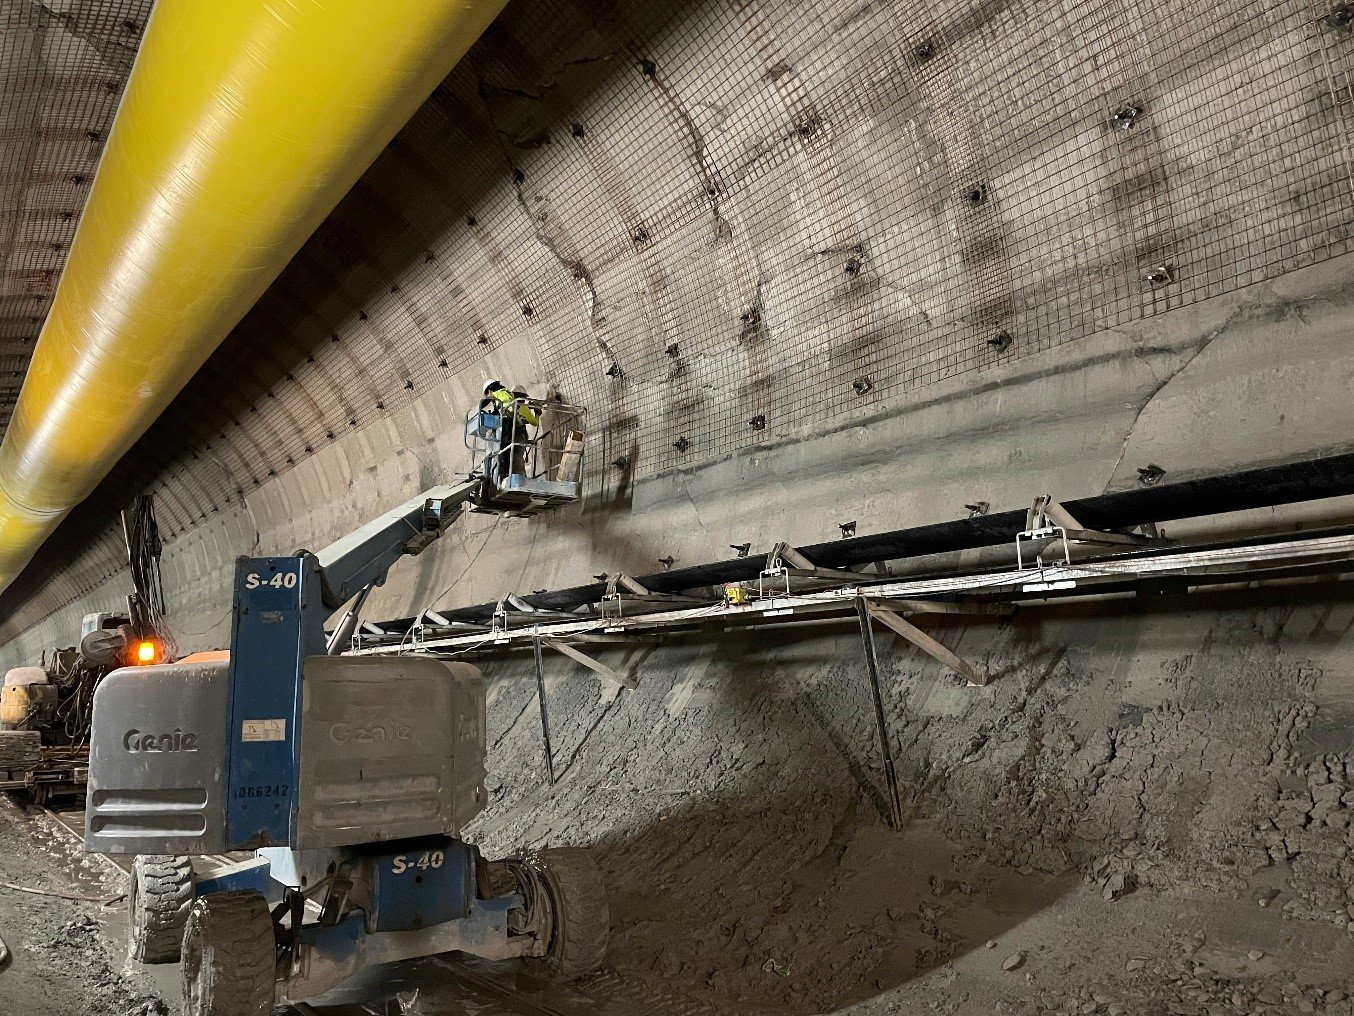 February 2022 - Installating additional Rock Dowels on the Tunnel Left Rib